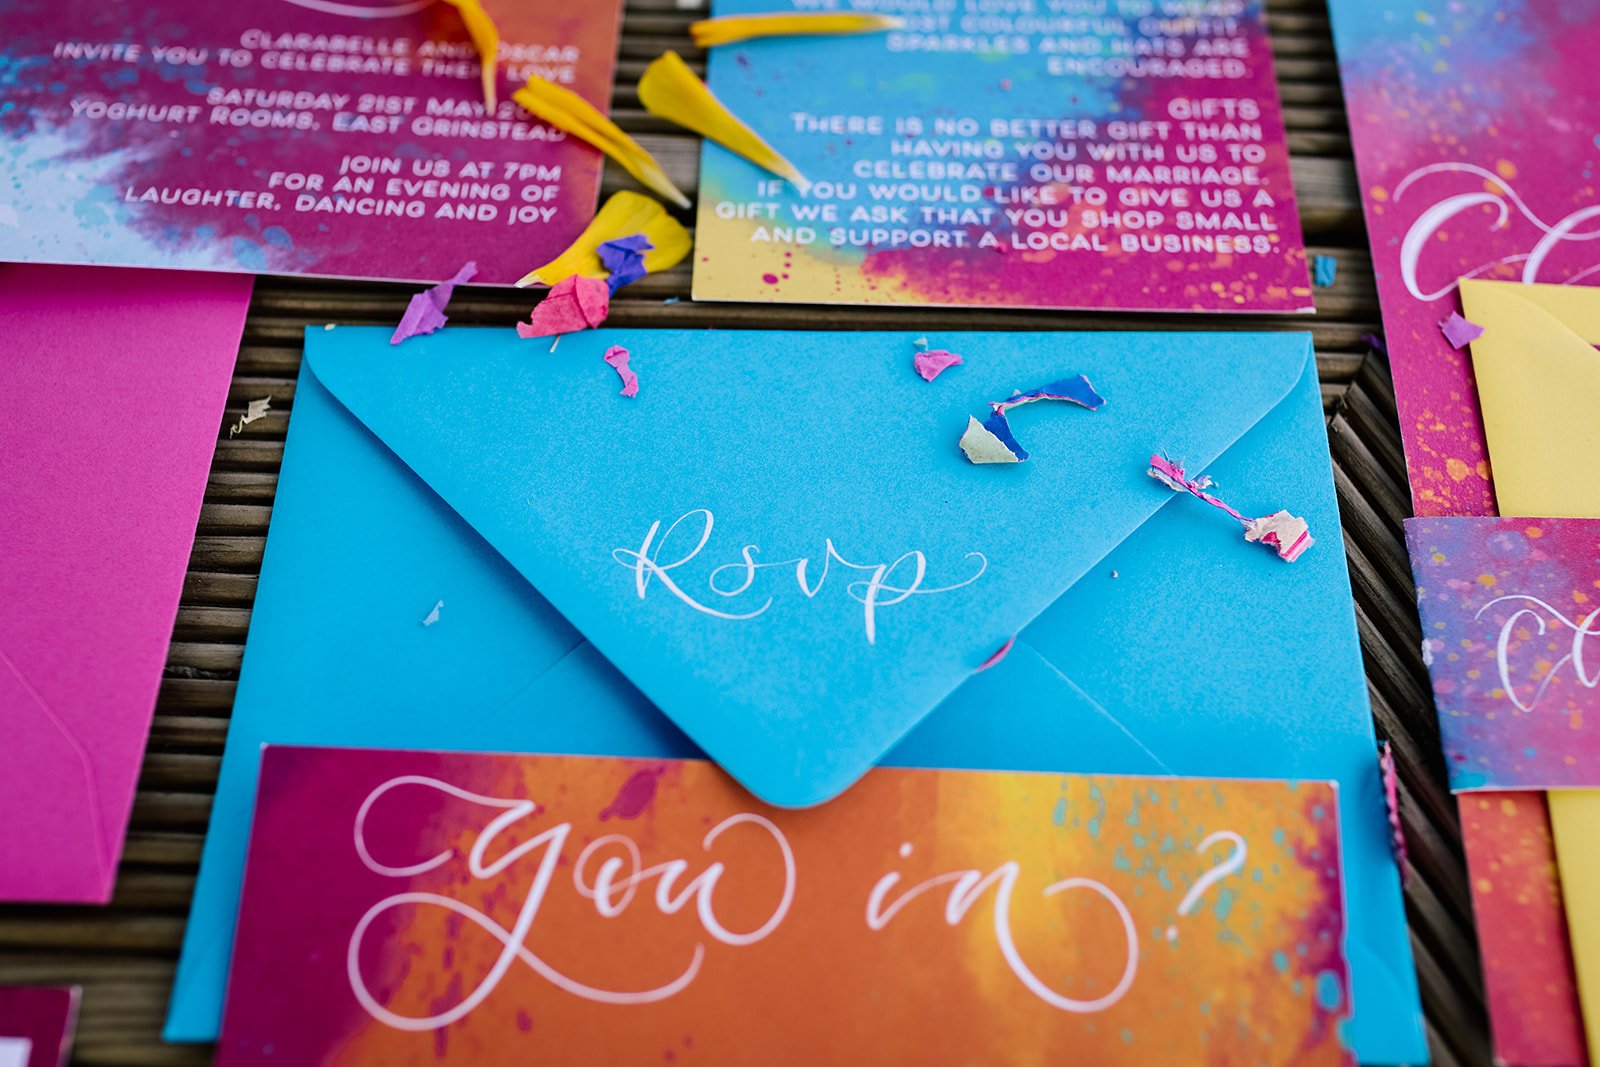 Festival wedding stationery watercolour wedding stationery with hot pink orange and blue,calligraphy, custom wax seals and calligraphy envelopes rsvp card.jpg